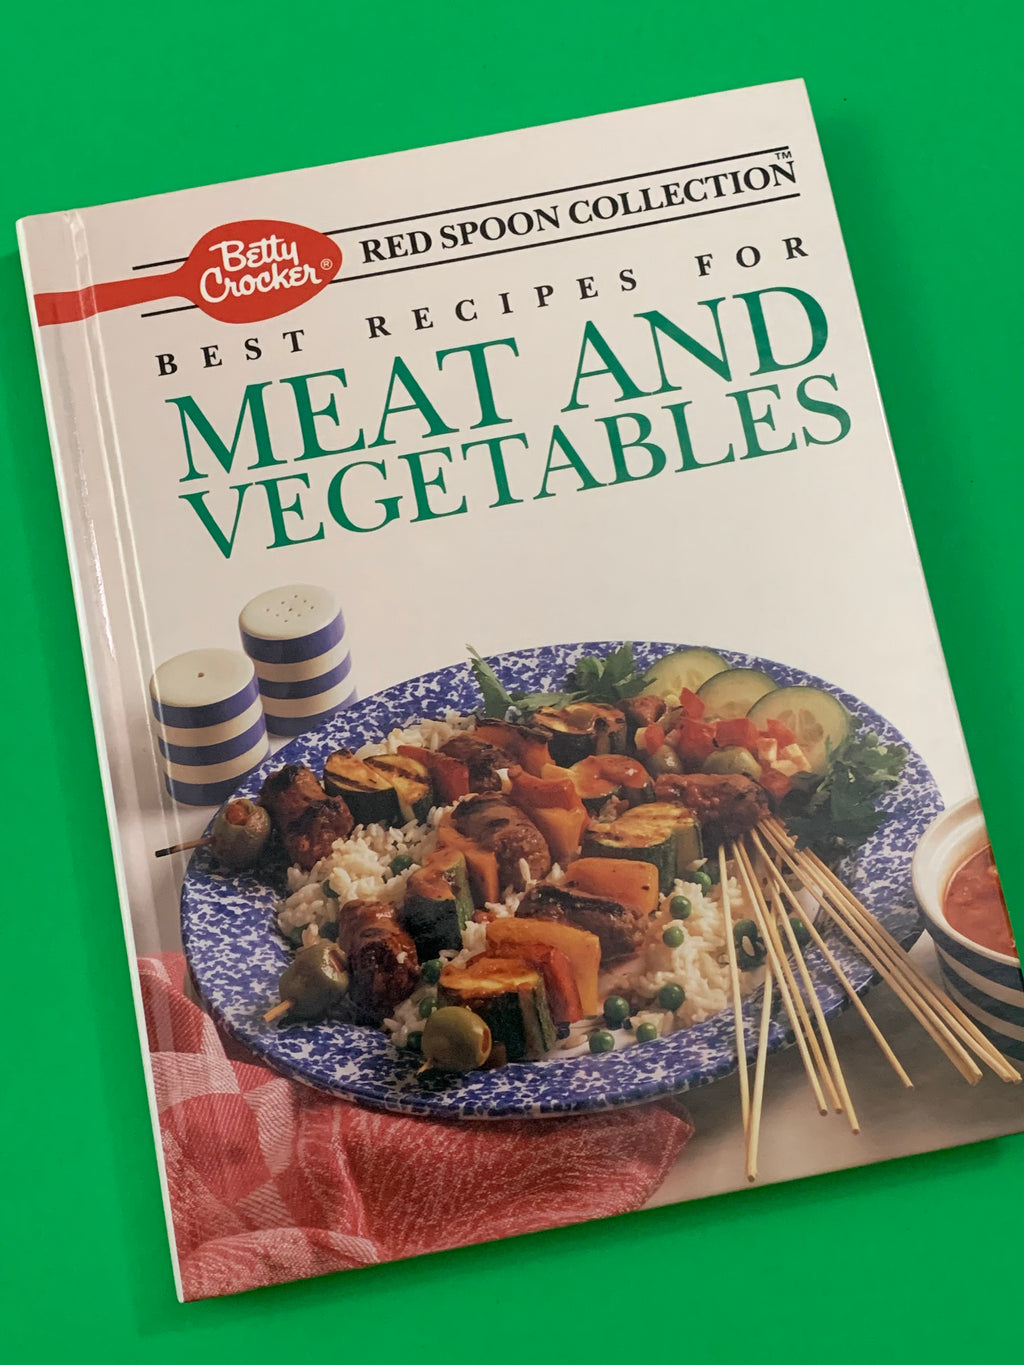 Best Recipes for Meat and Vegetables: Betty Crocker Red Spoon Collection